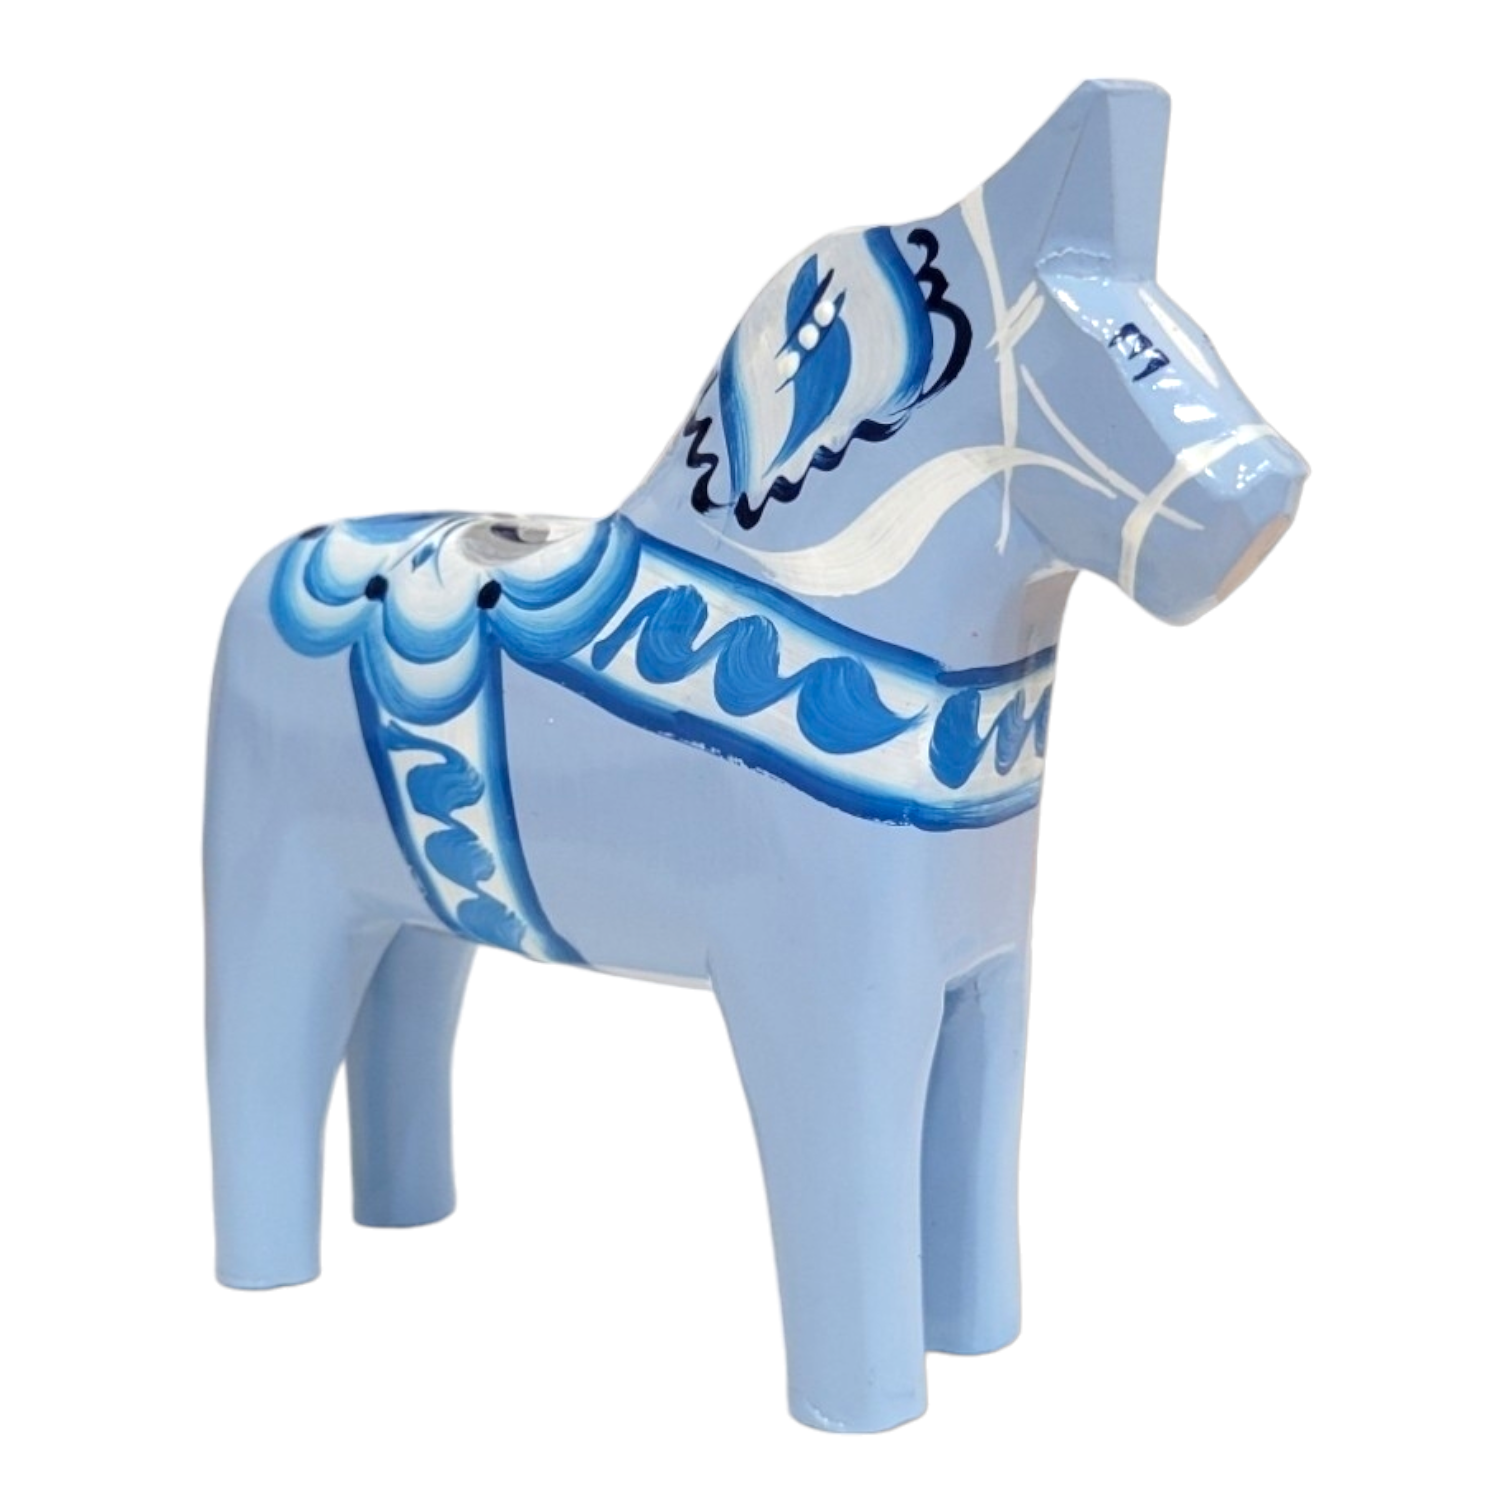 Dala Horse: Baby Shower Pink or Blue